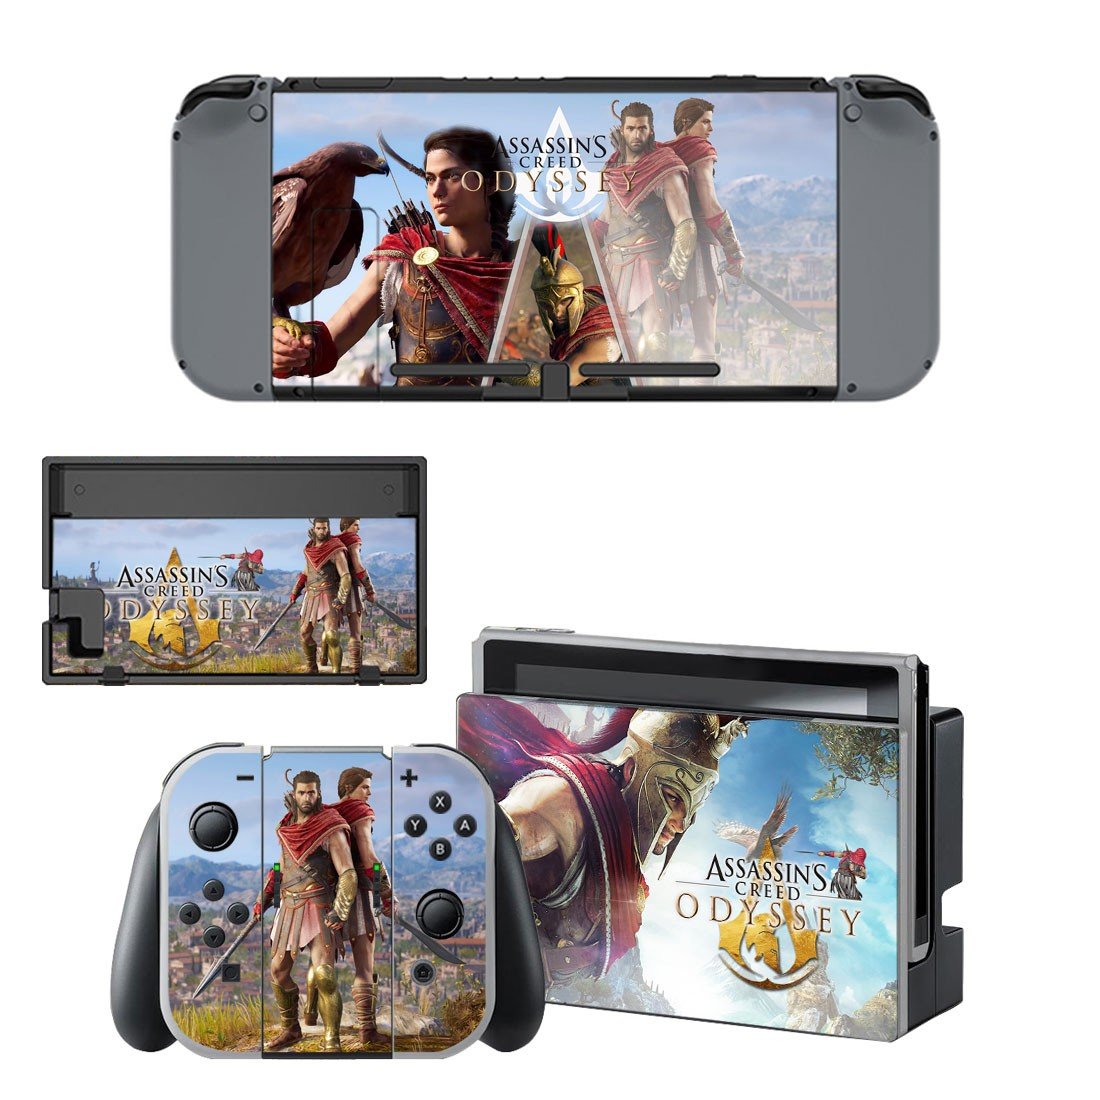 assassin's creed odyssey on switch